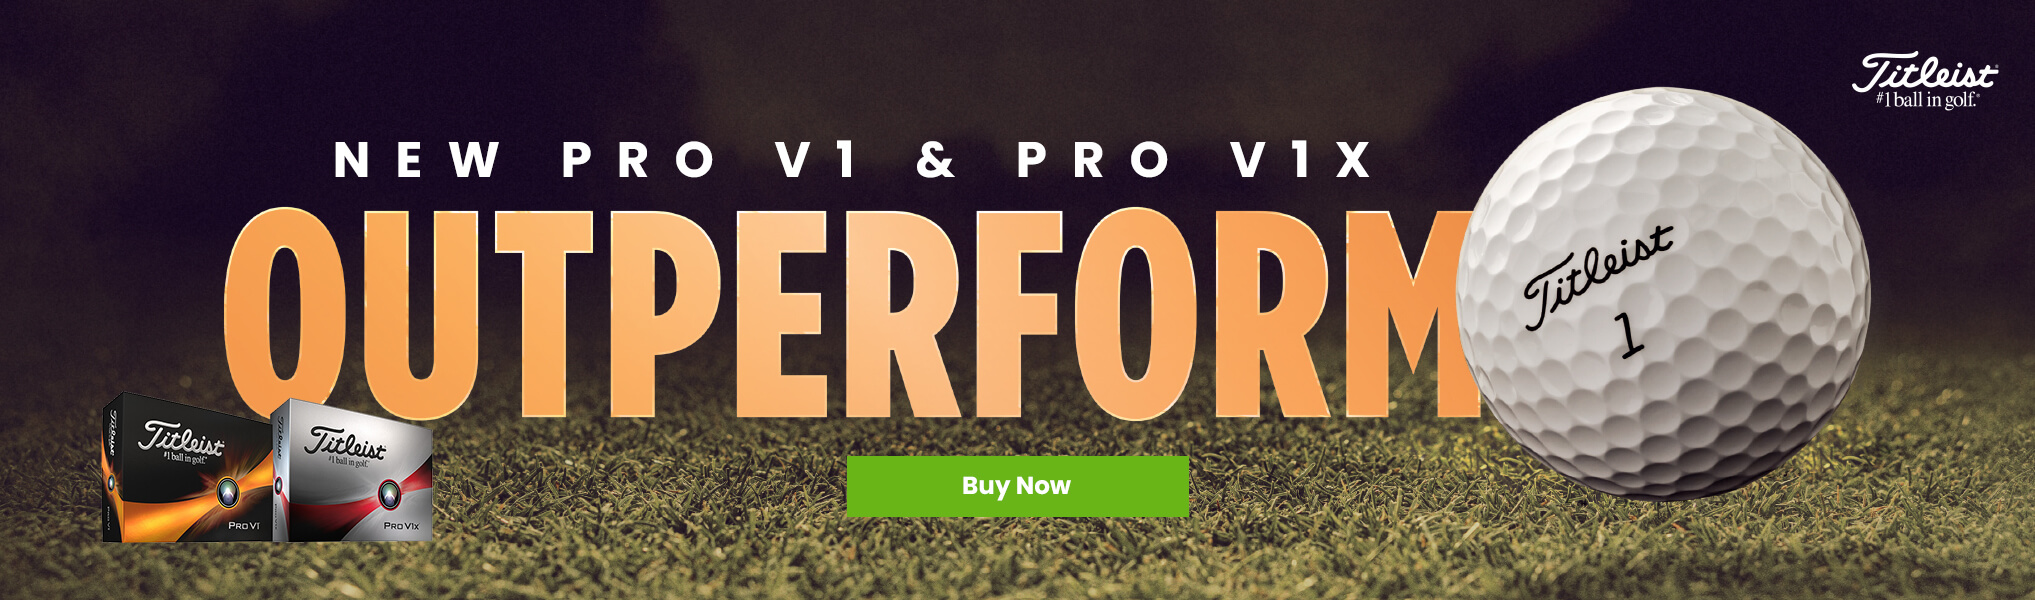 223 Pro V1 and Pro V1x Available Now